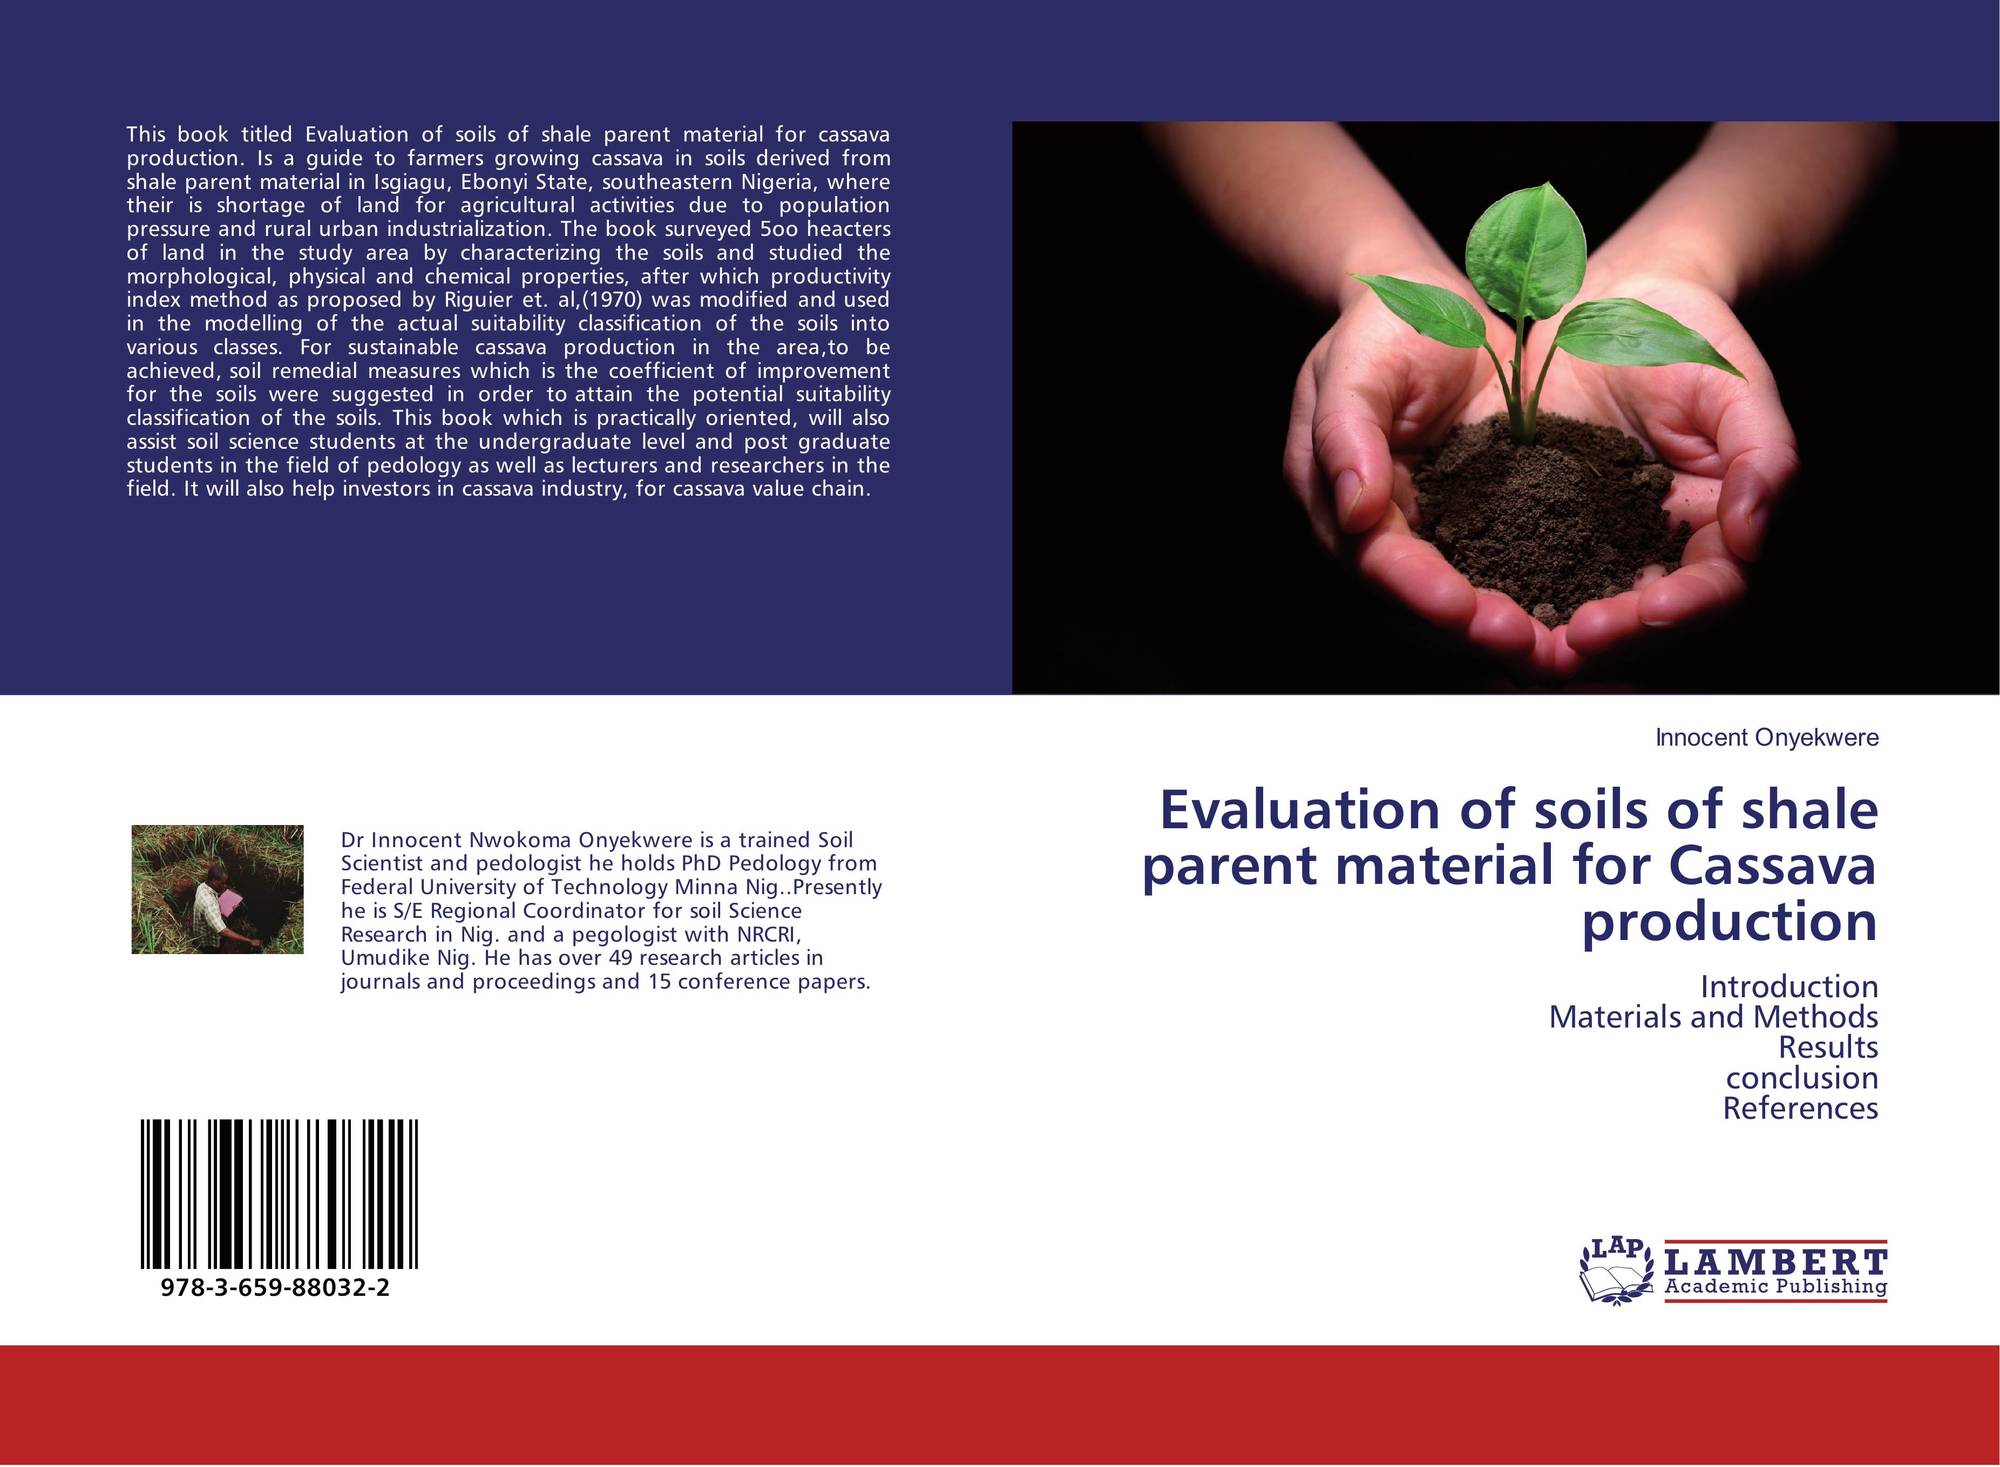 Materials and methods. Introduction, materials and methods, Results, and discussion. Pedology. Dynamic properties and indicators of Soil book Cover. Dogs of Winter 09-from Soil to Shale (Stoner USA).